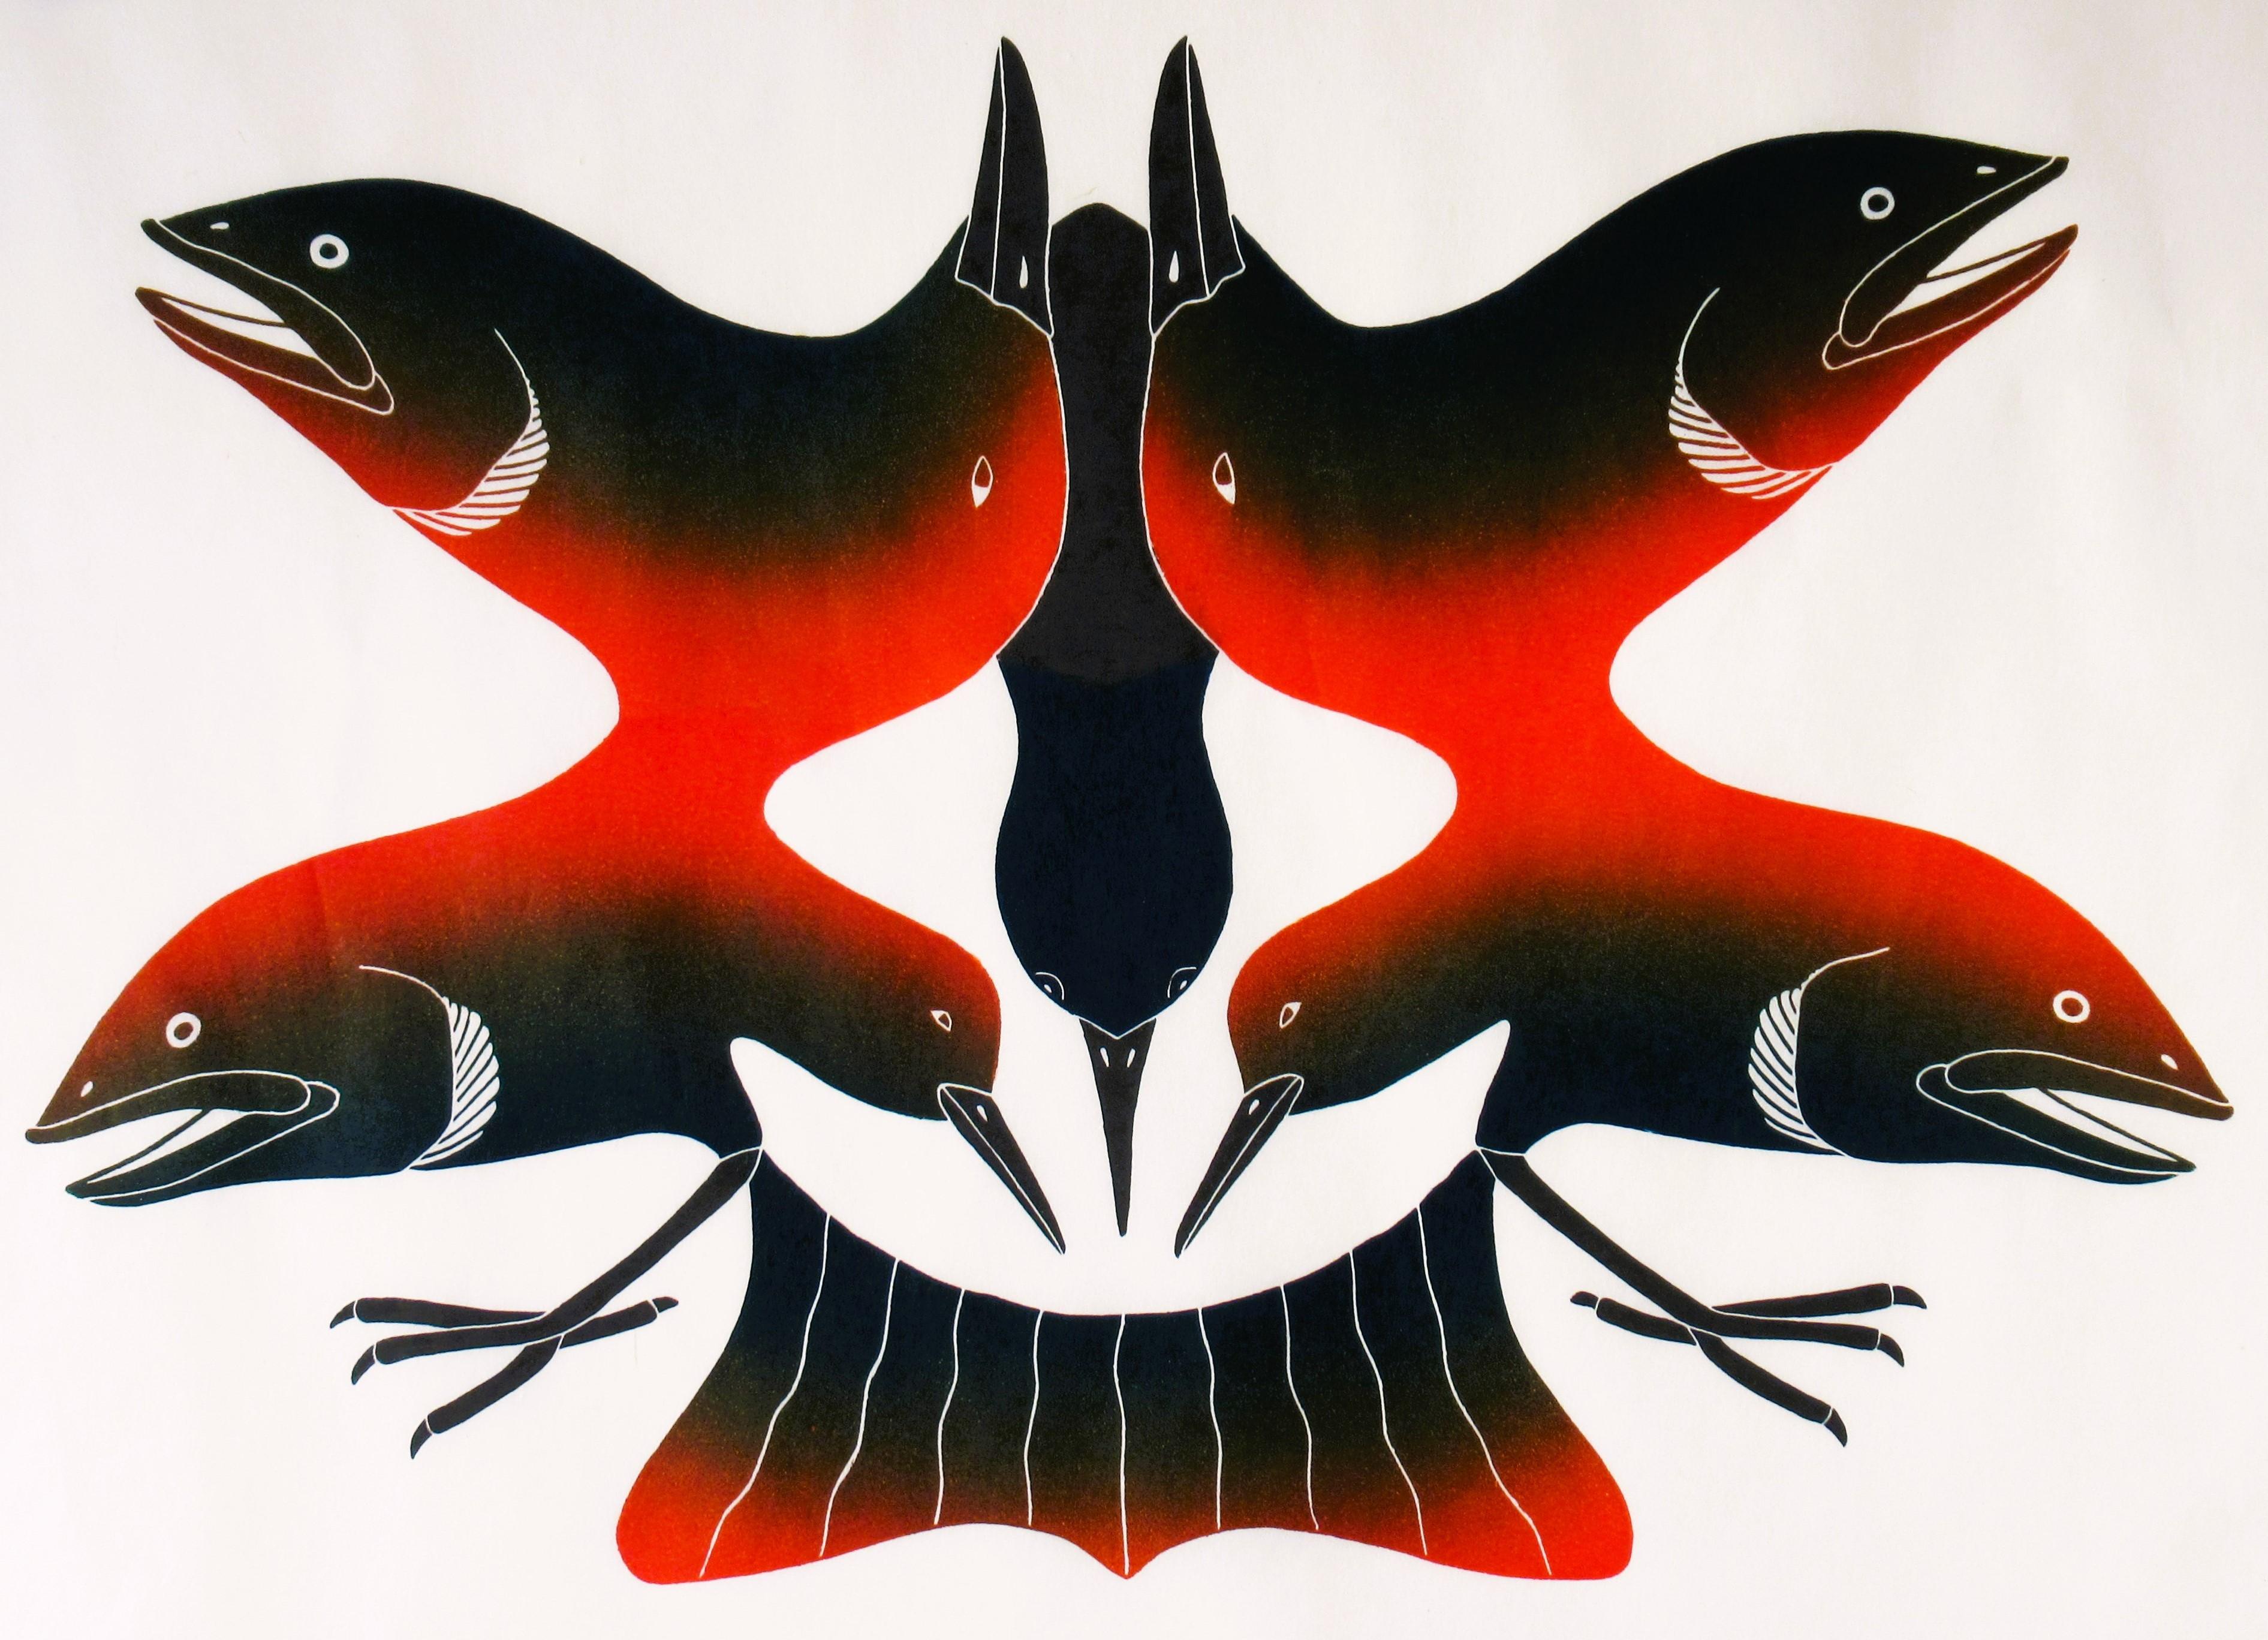 Fish Become Birds - Print by Kavavaow Mannomee